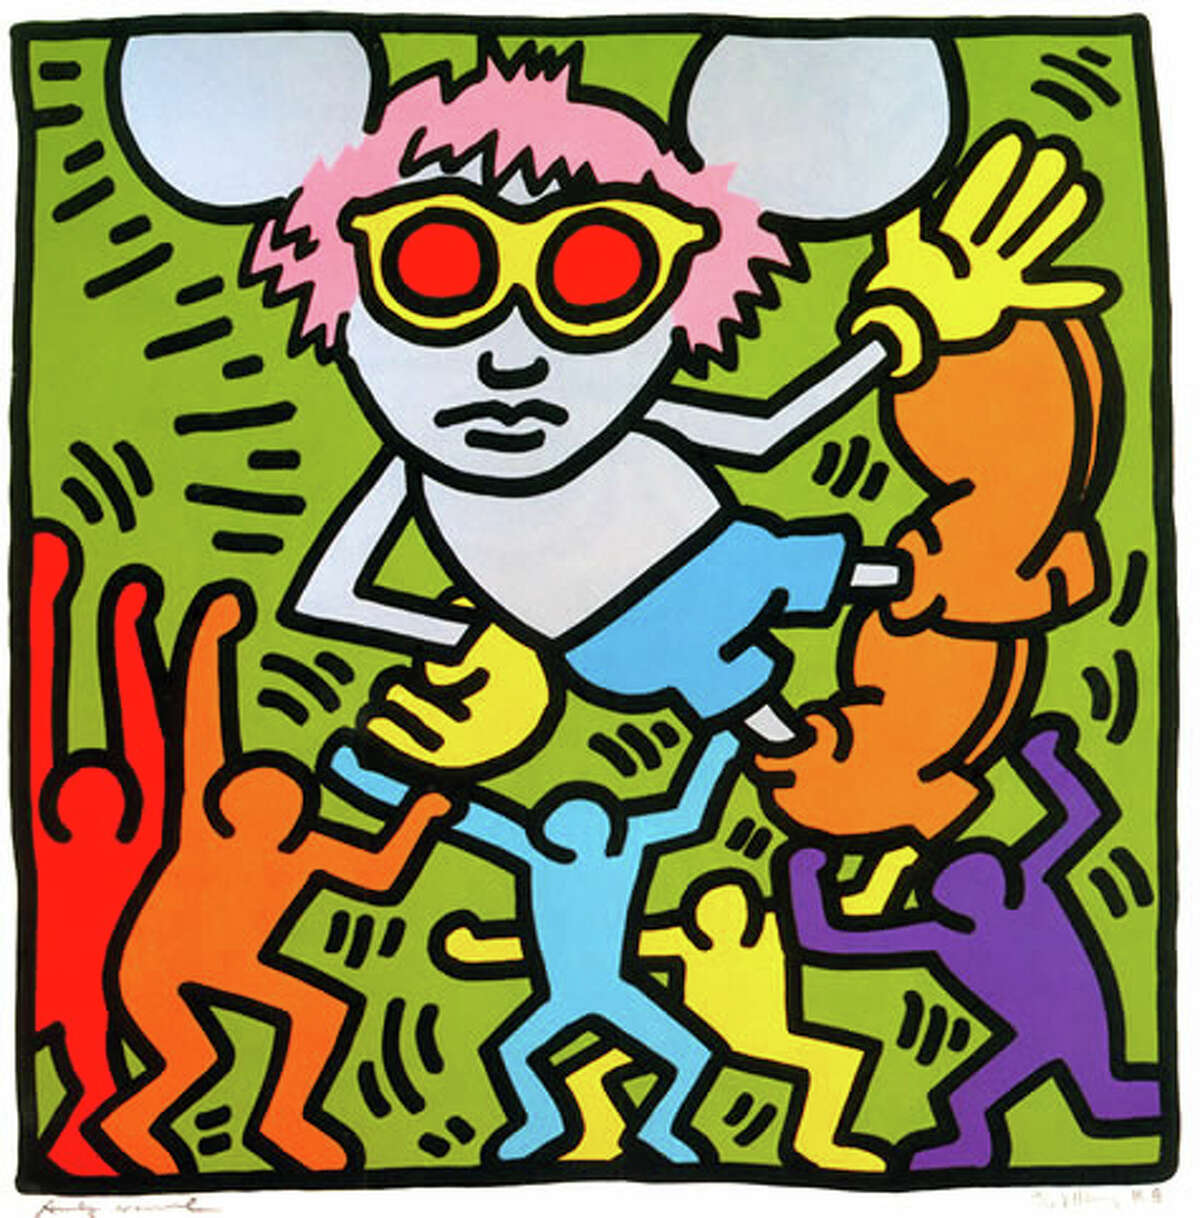  Jerseyville First Presbyterian Church, 400 S. State St., will host a Kids at HeART Art Appreciation event celebrating the art of Keith Haring from 4-5:30 p.m. Tuesday, May 3.